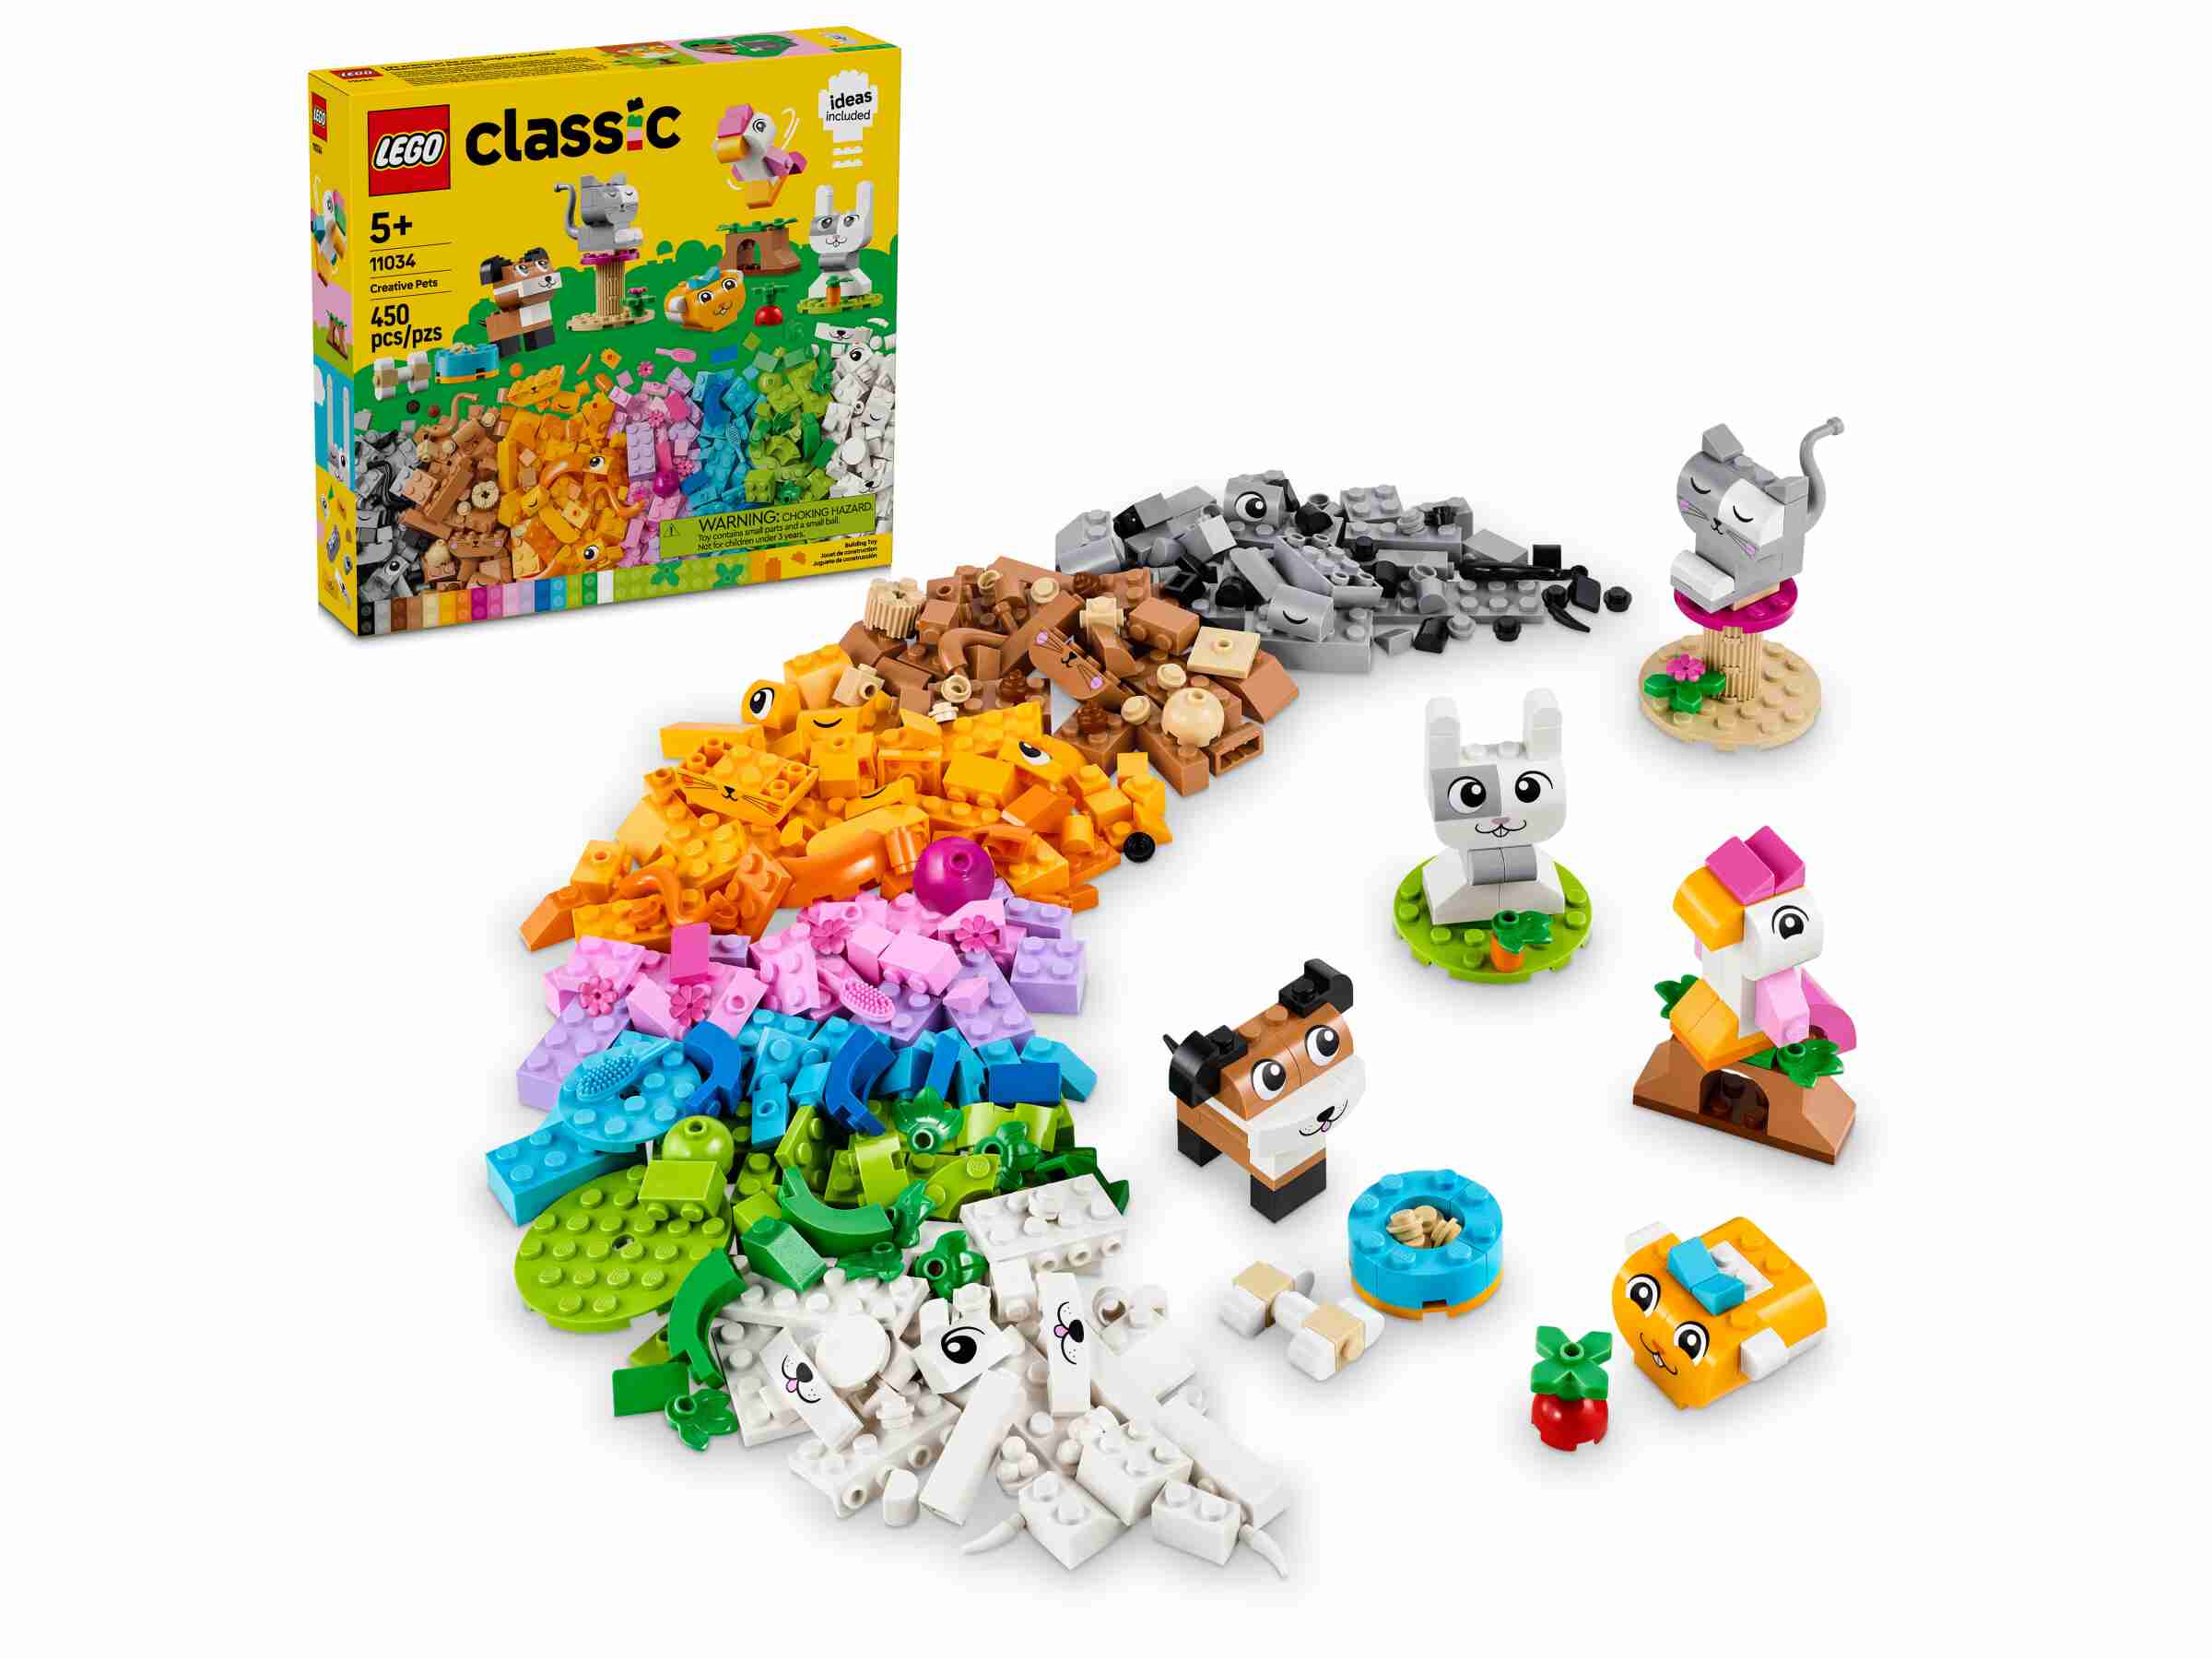 LEGO 11034 Classic Kreative Tiere, inklusive Anleitung mit 10 Bauideen